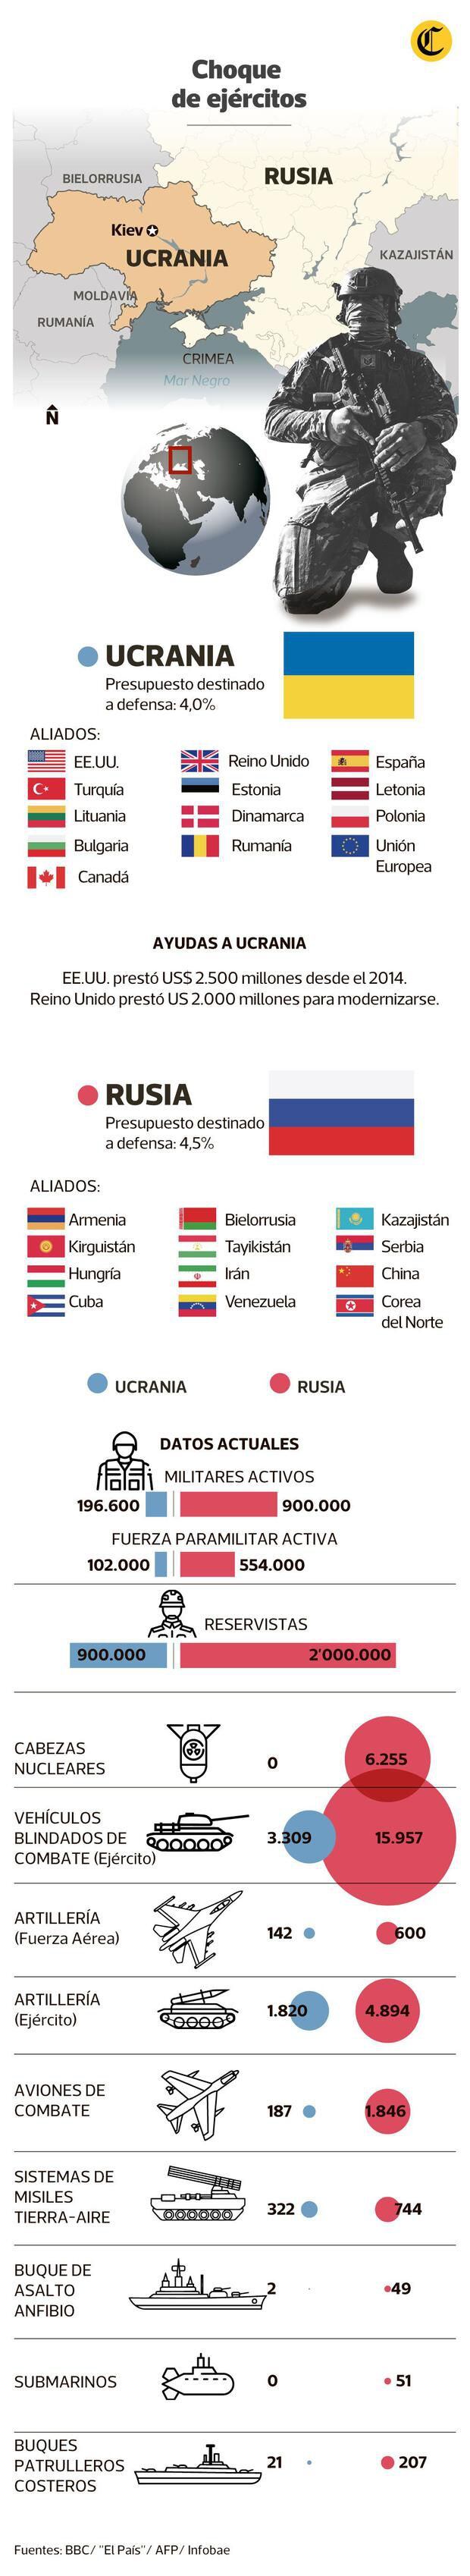 Military might of Russia and Ukraine.  (Trade).